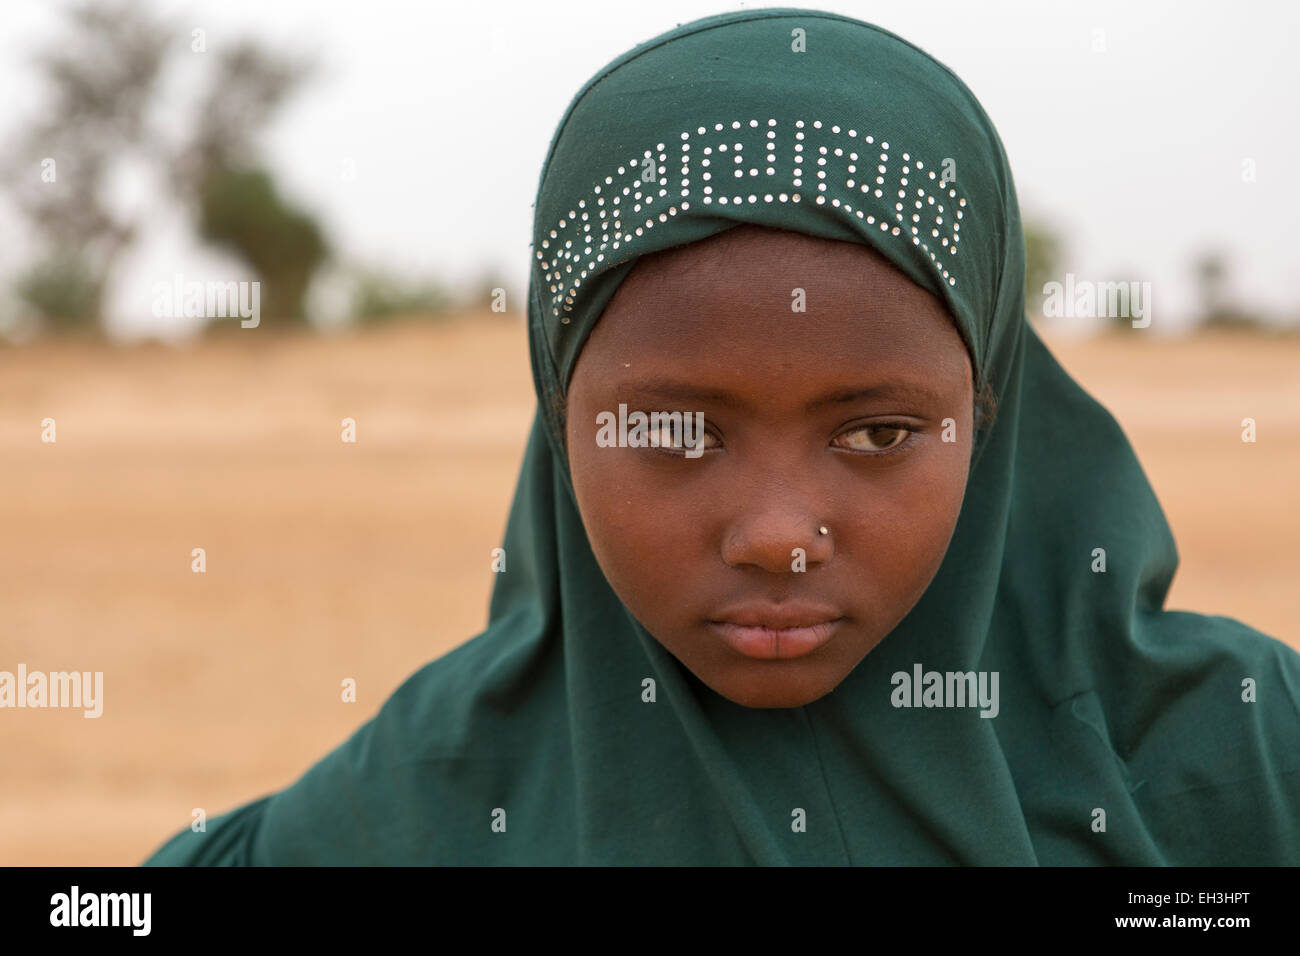 Western Niger, near Tera, 15th May 2012: Saffia Marou, 13, collects water from a hand dug well in a dry river bed. Stock Photo